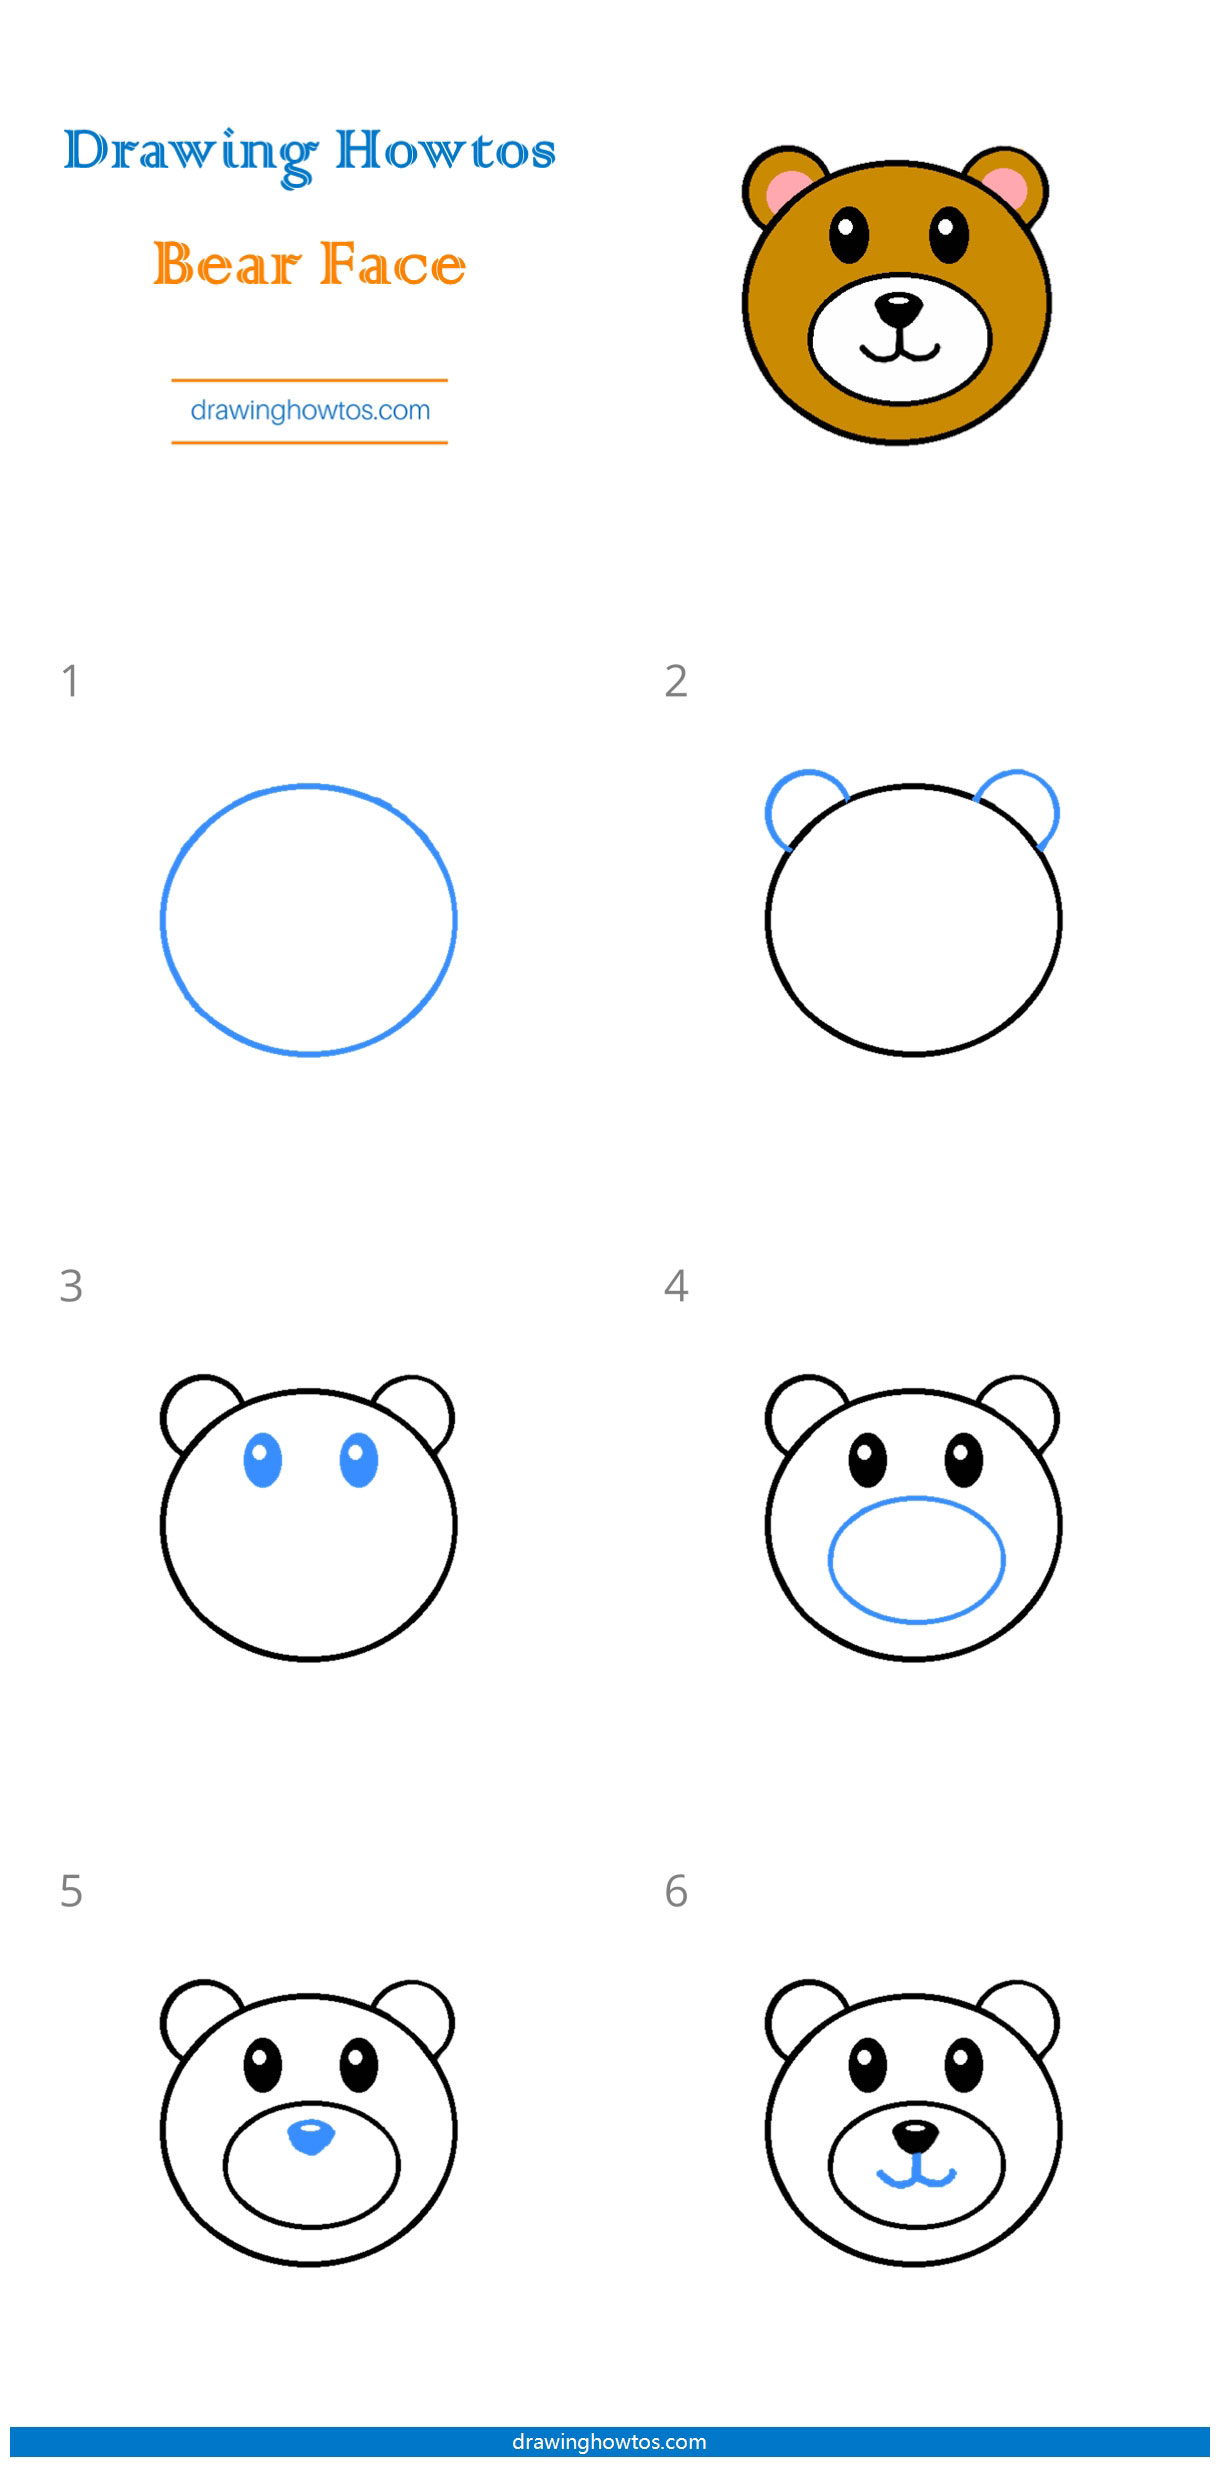 How to Draw a Bear Face Step by Step